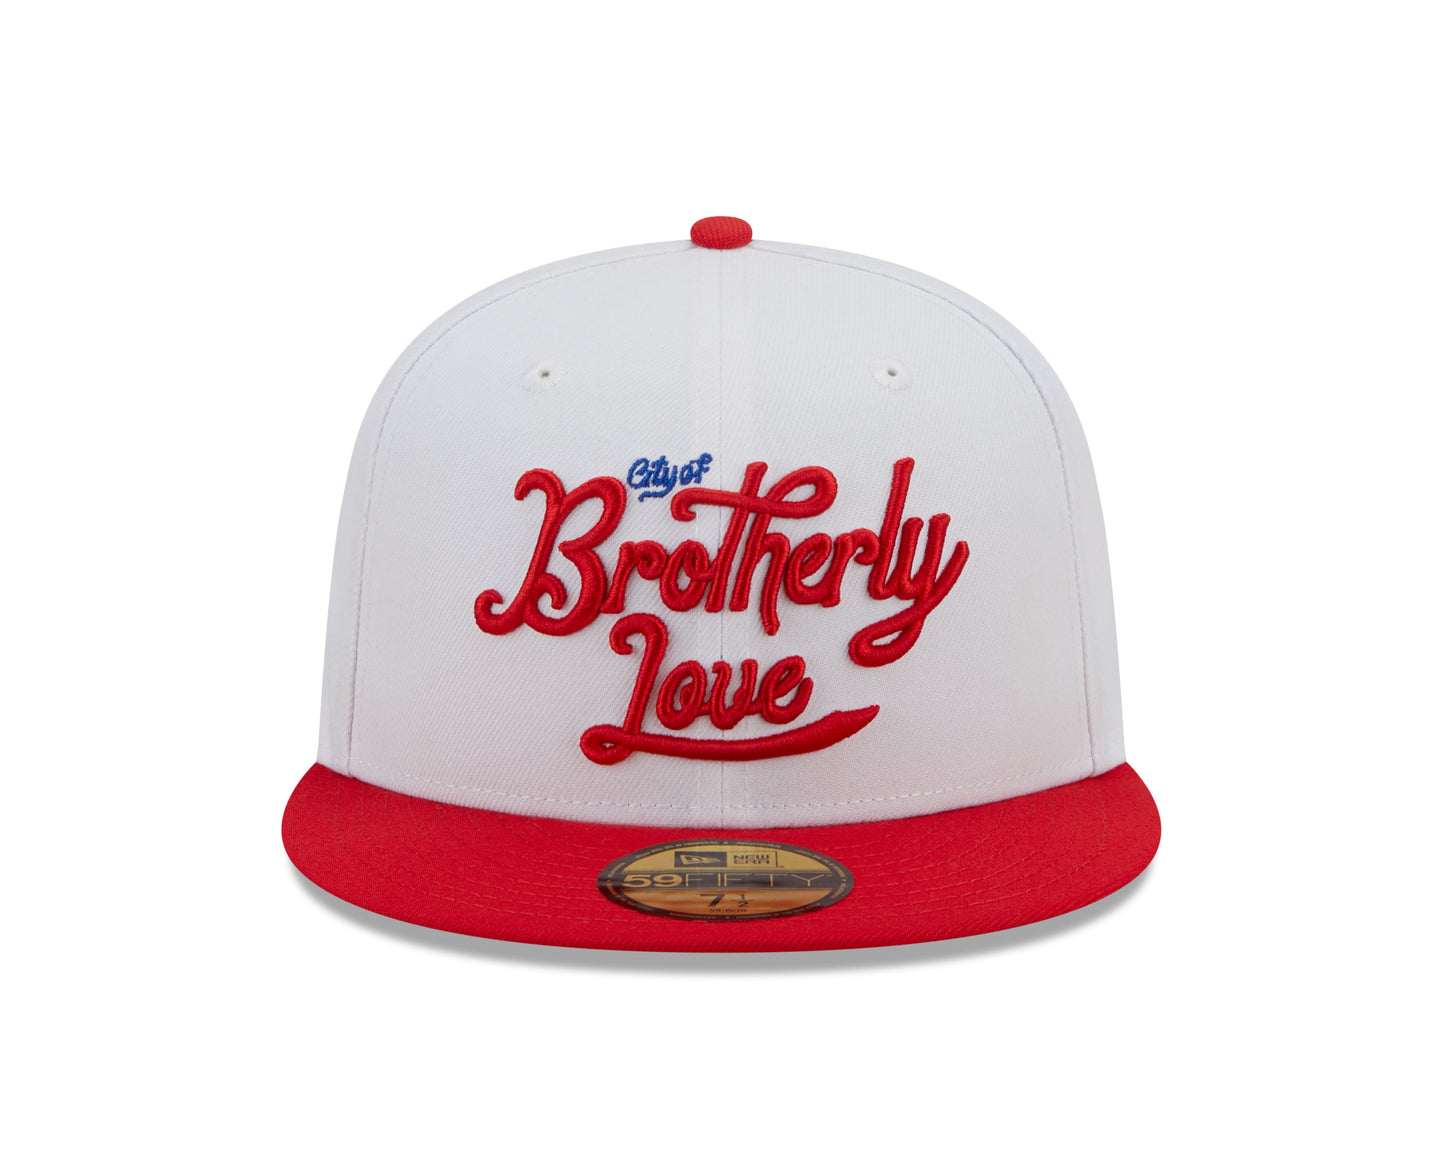 Philadelphia 76ers New Era City Edition 59FIFTY Fitted Hat - White